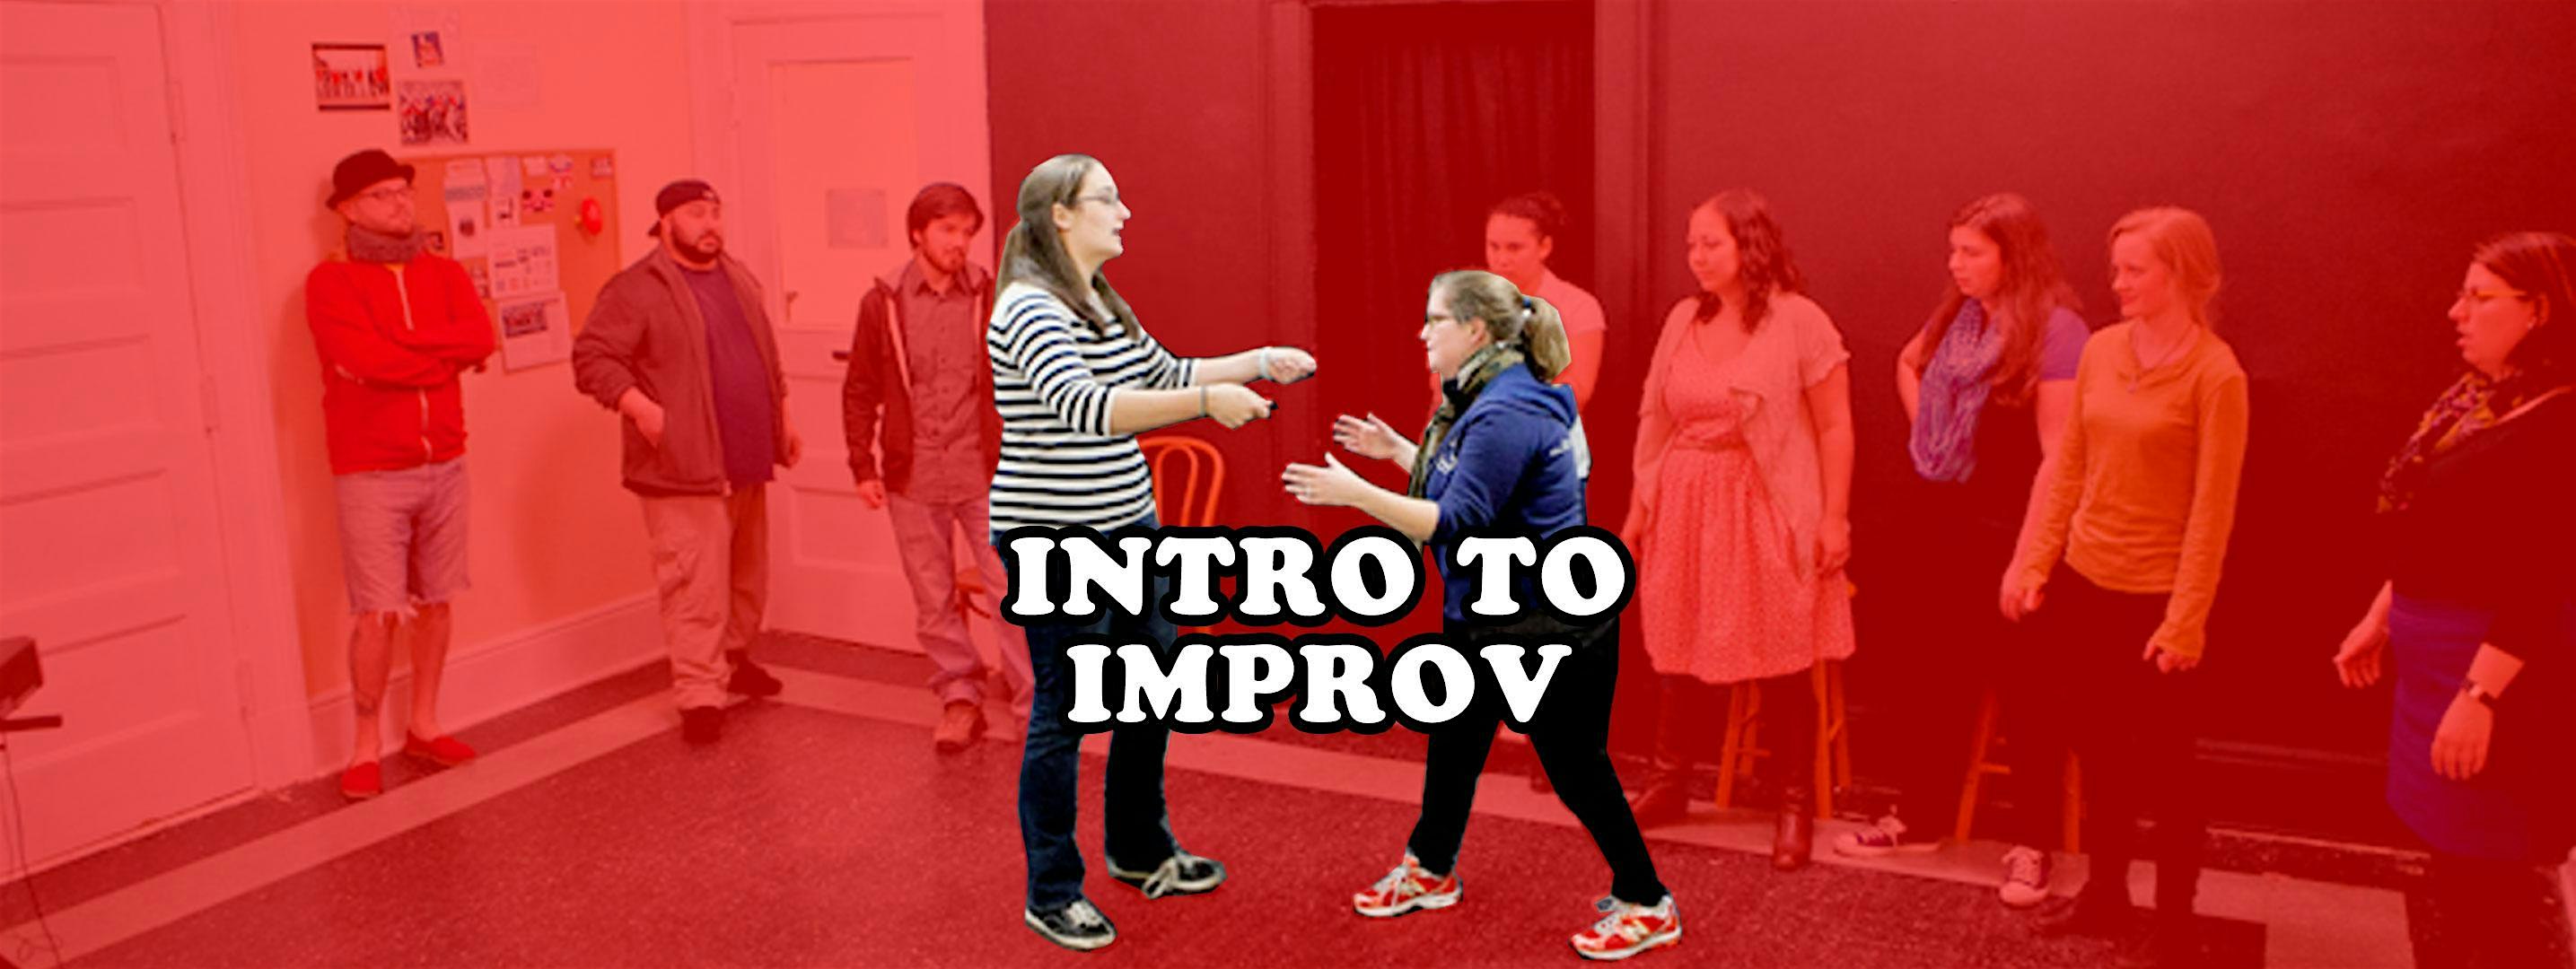 Intro to Improv: 4-week Comedy Course for Beginners